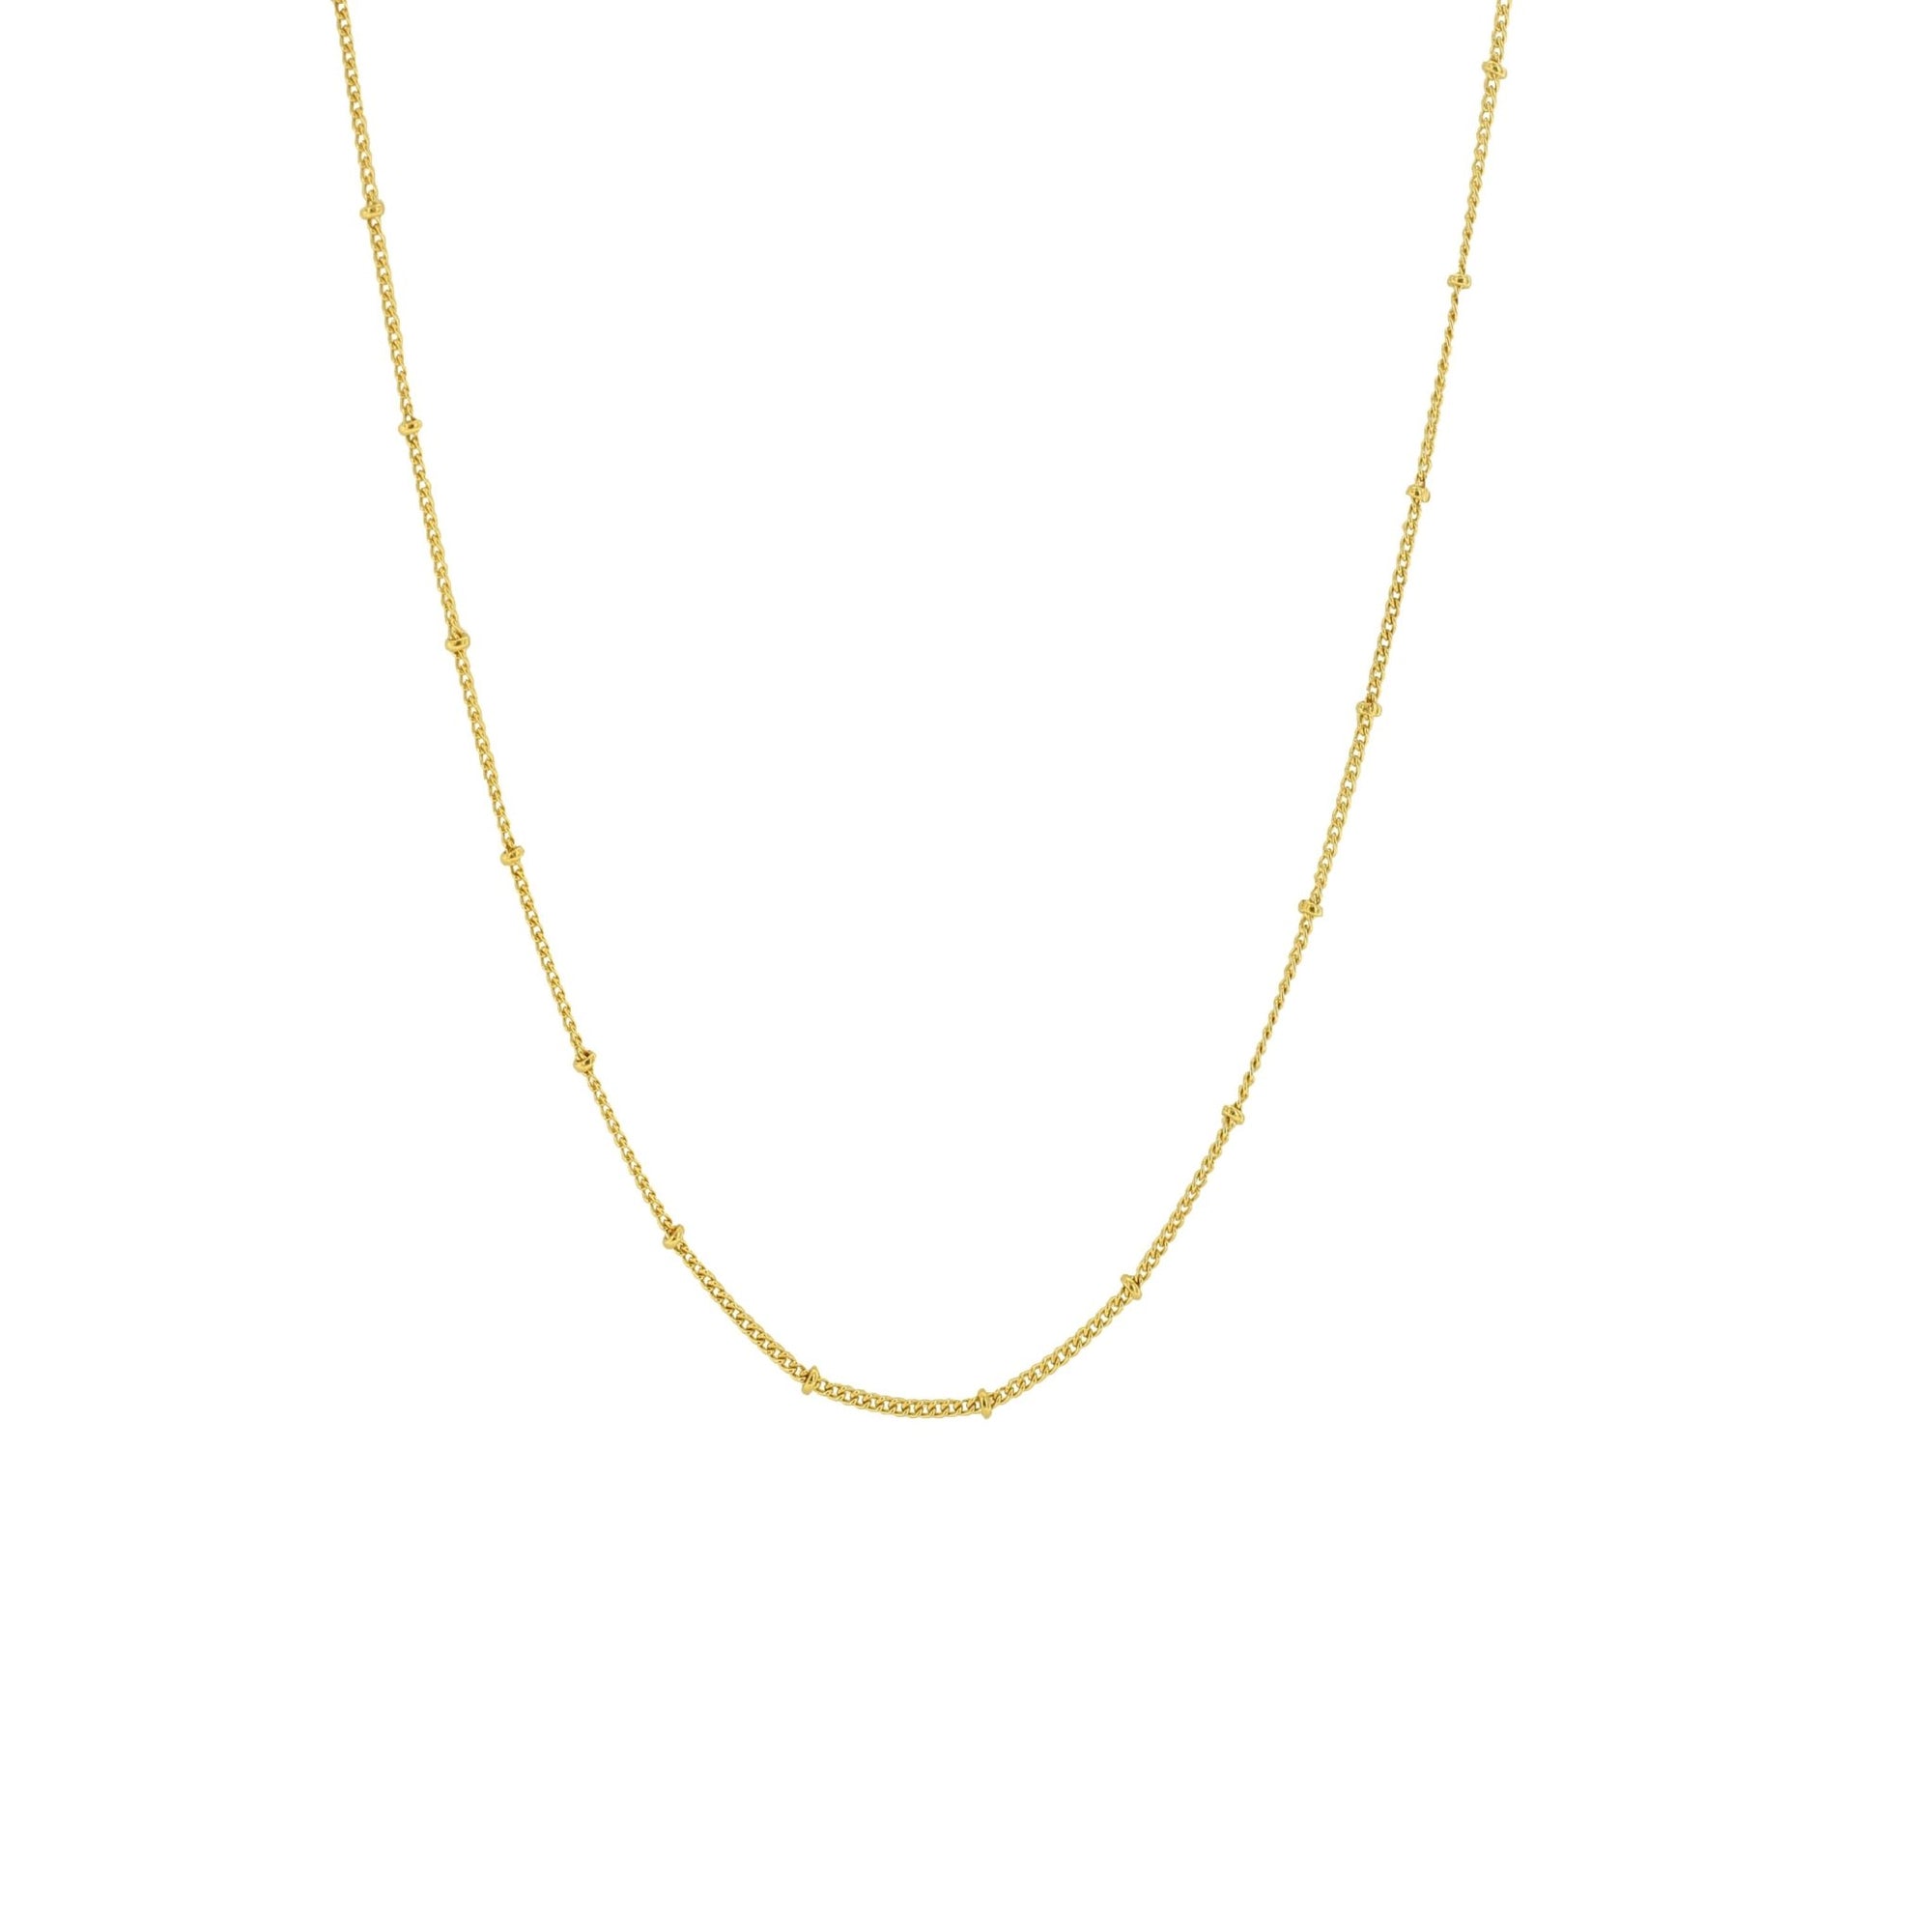 CHARMING 22-24" BEADED NECKLACE GOLD- PREORDER - SO PRETTY CARA COTTER